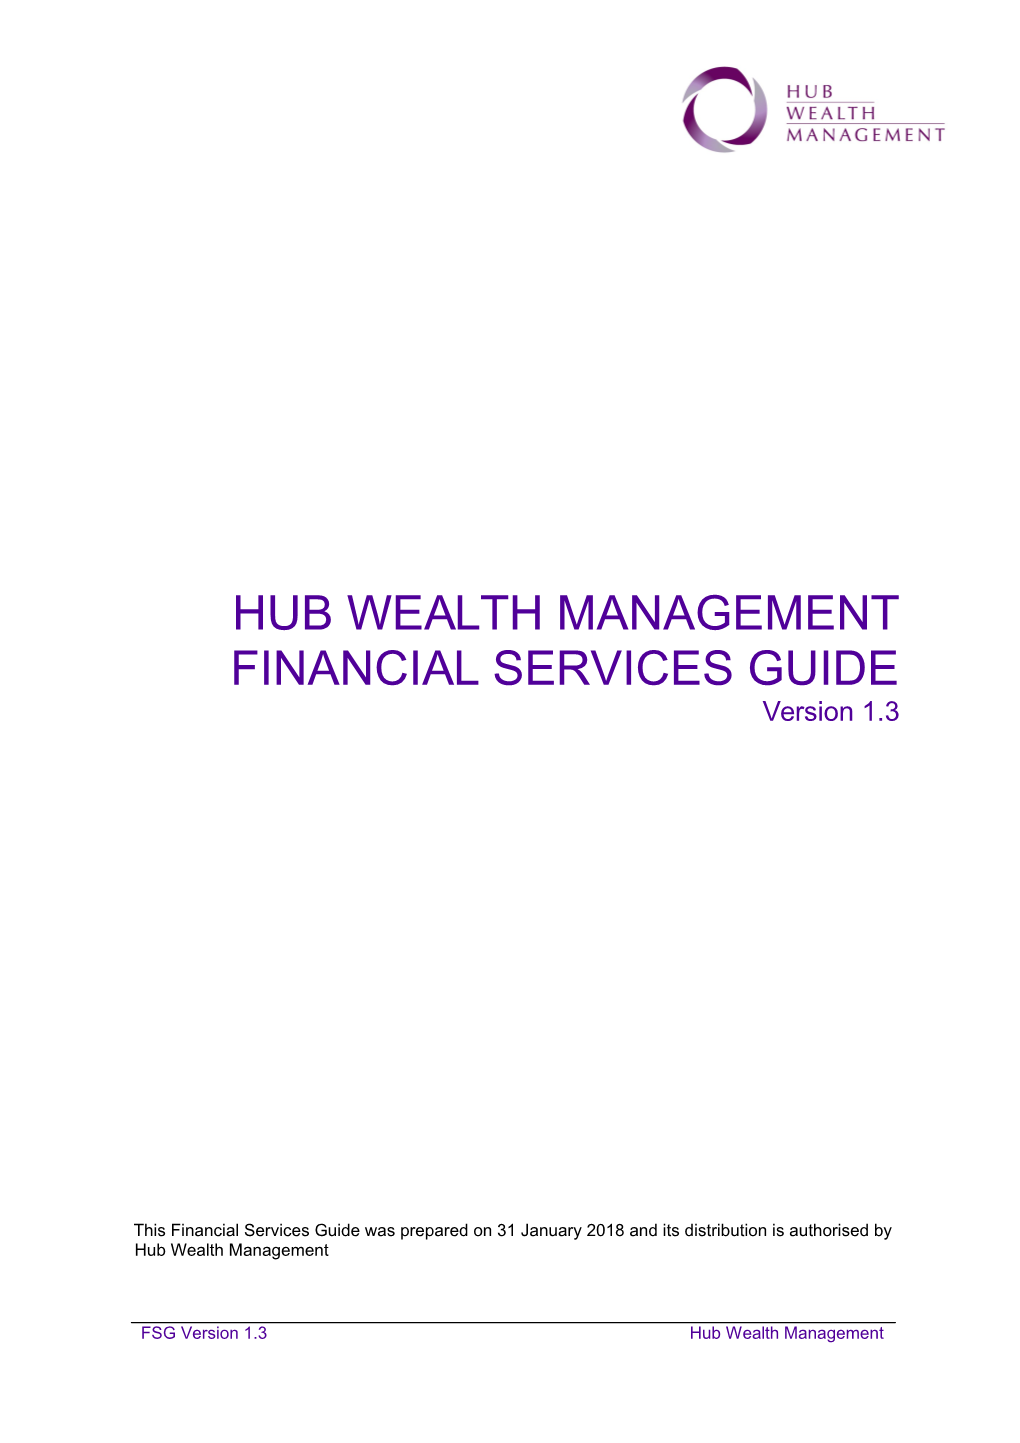 Hub Wealth Management Financial Services Guide